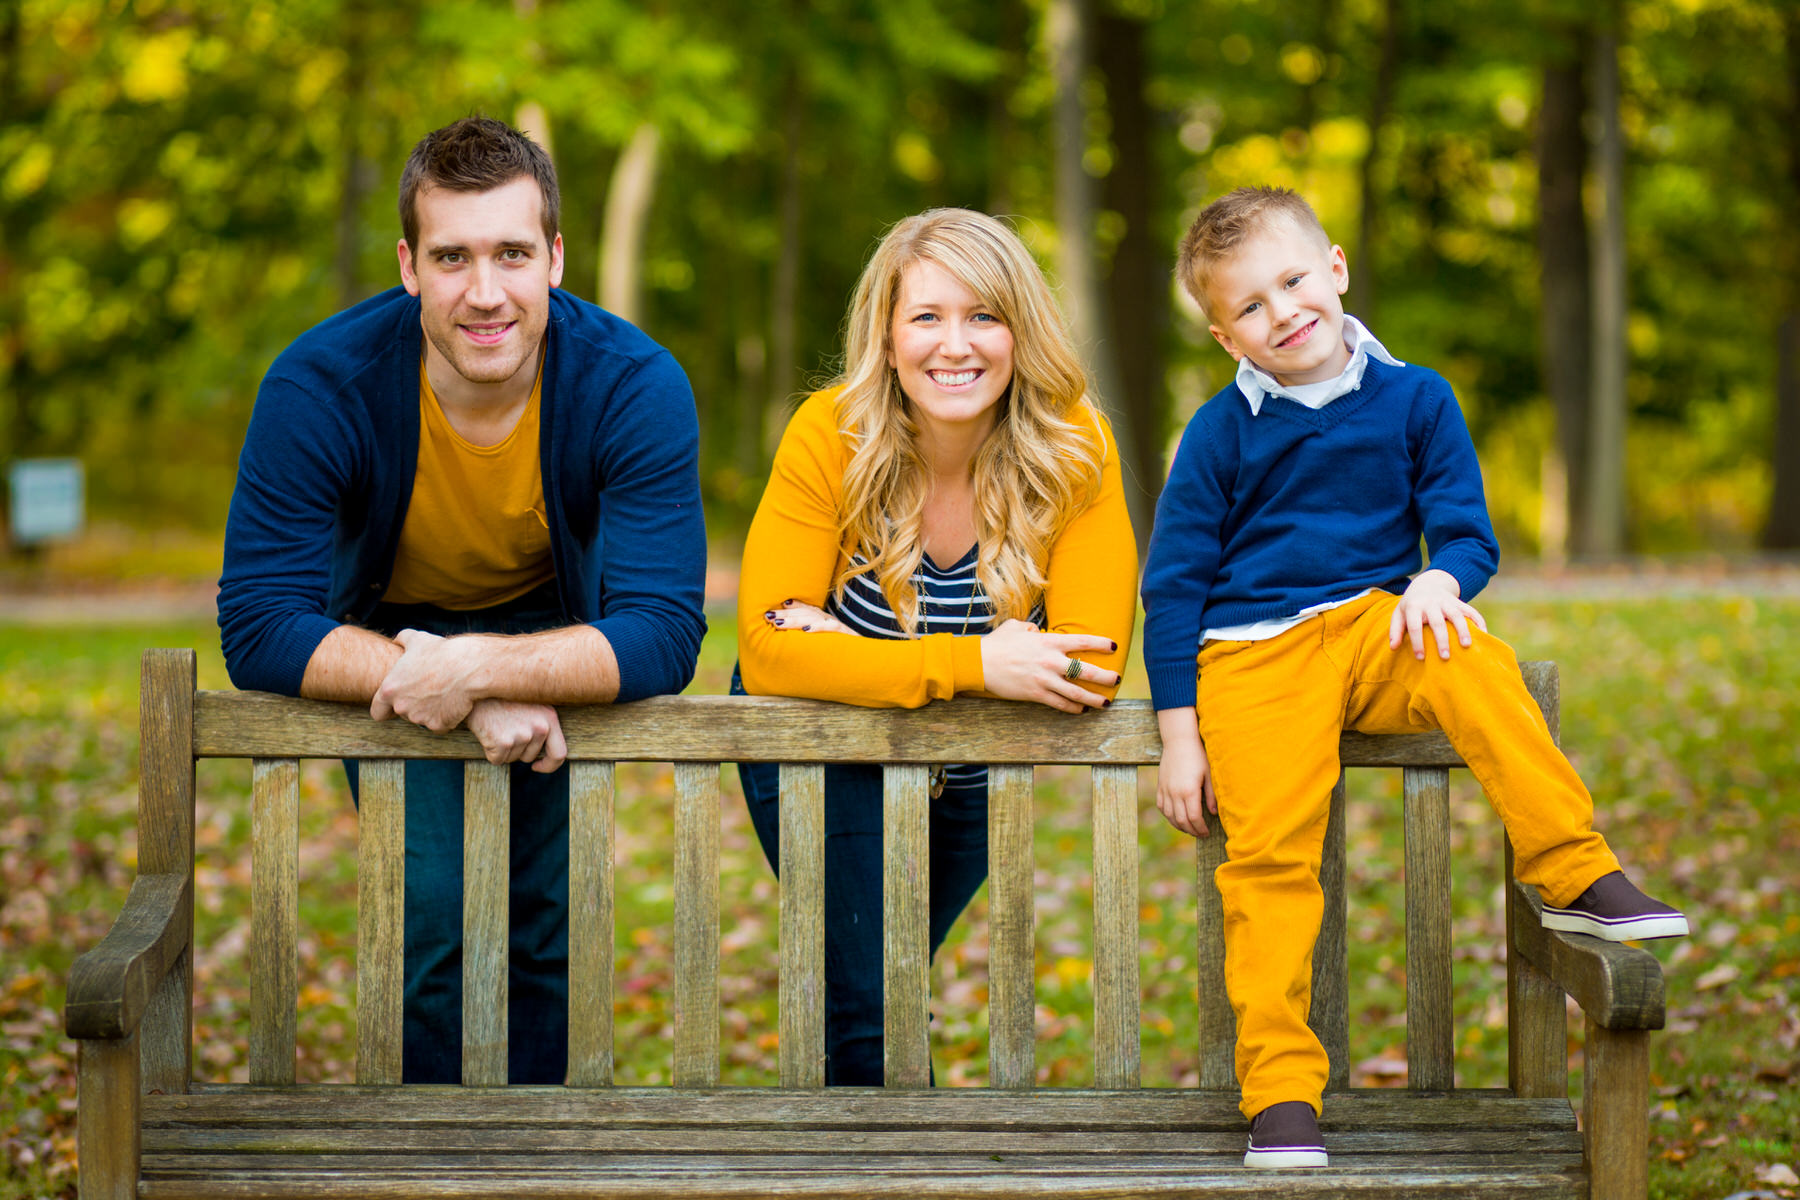 35+ Best Colors To Wear For Family Pictures In The Fall